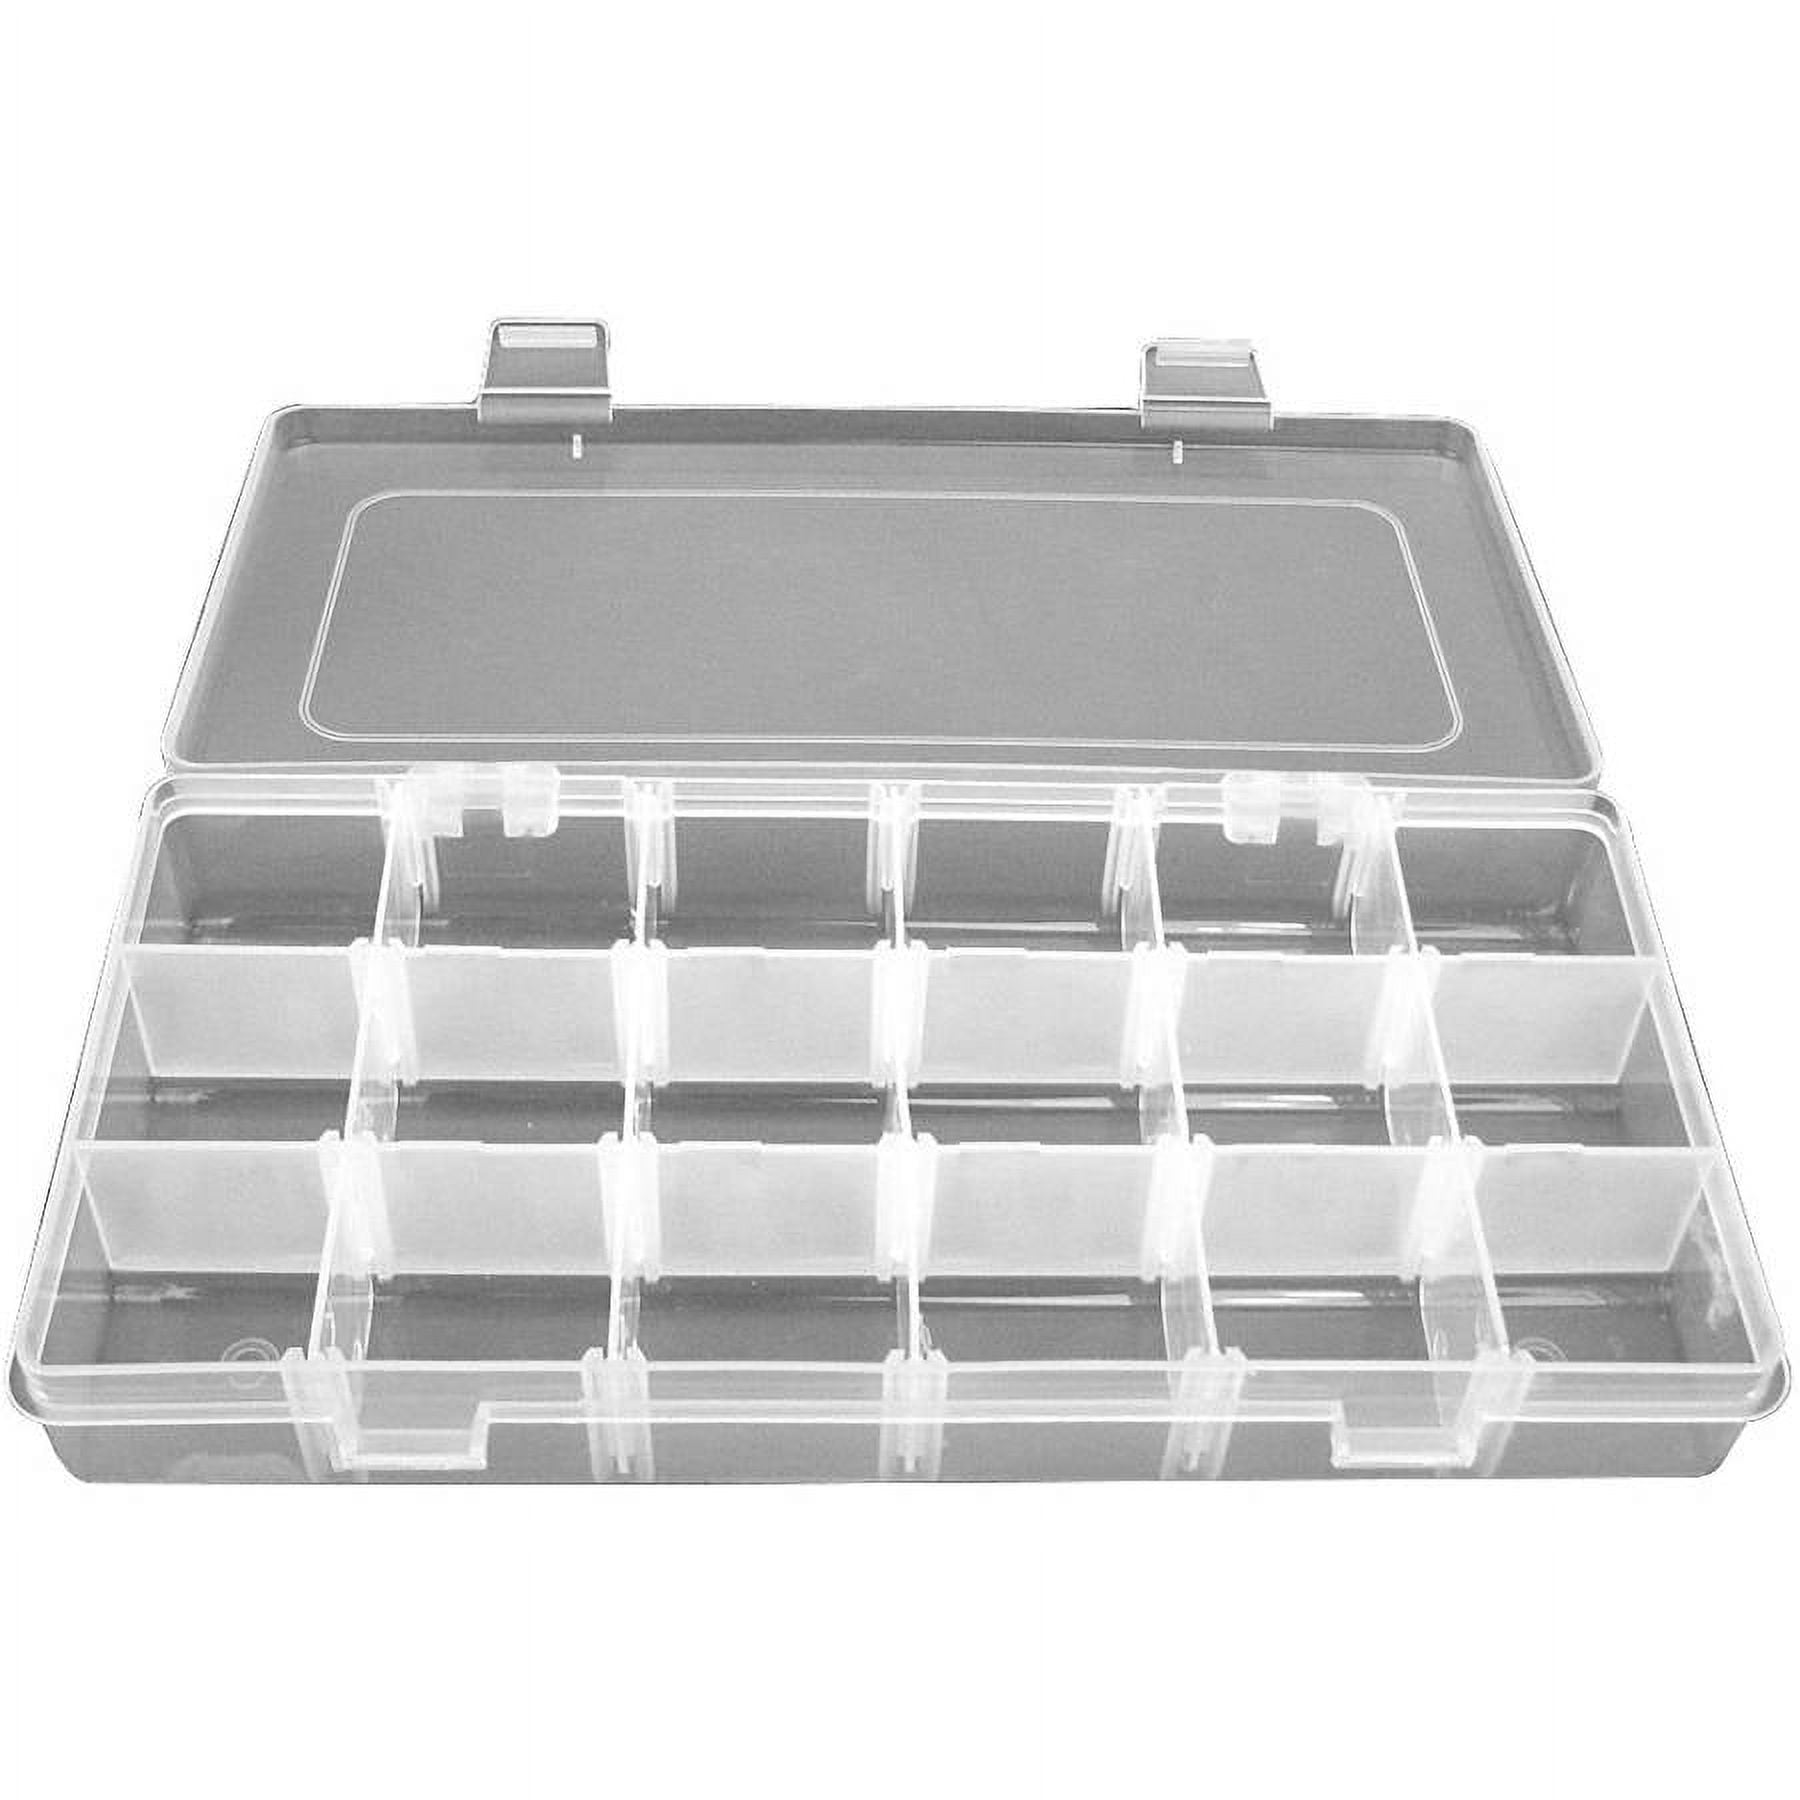 Stalwart 73-Compartment Durable Plastic Storage Tool Box